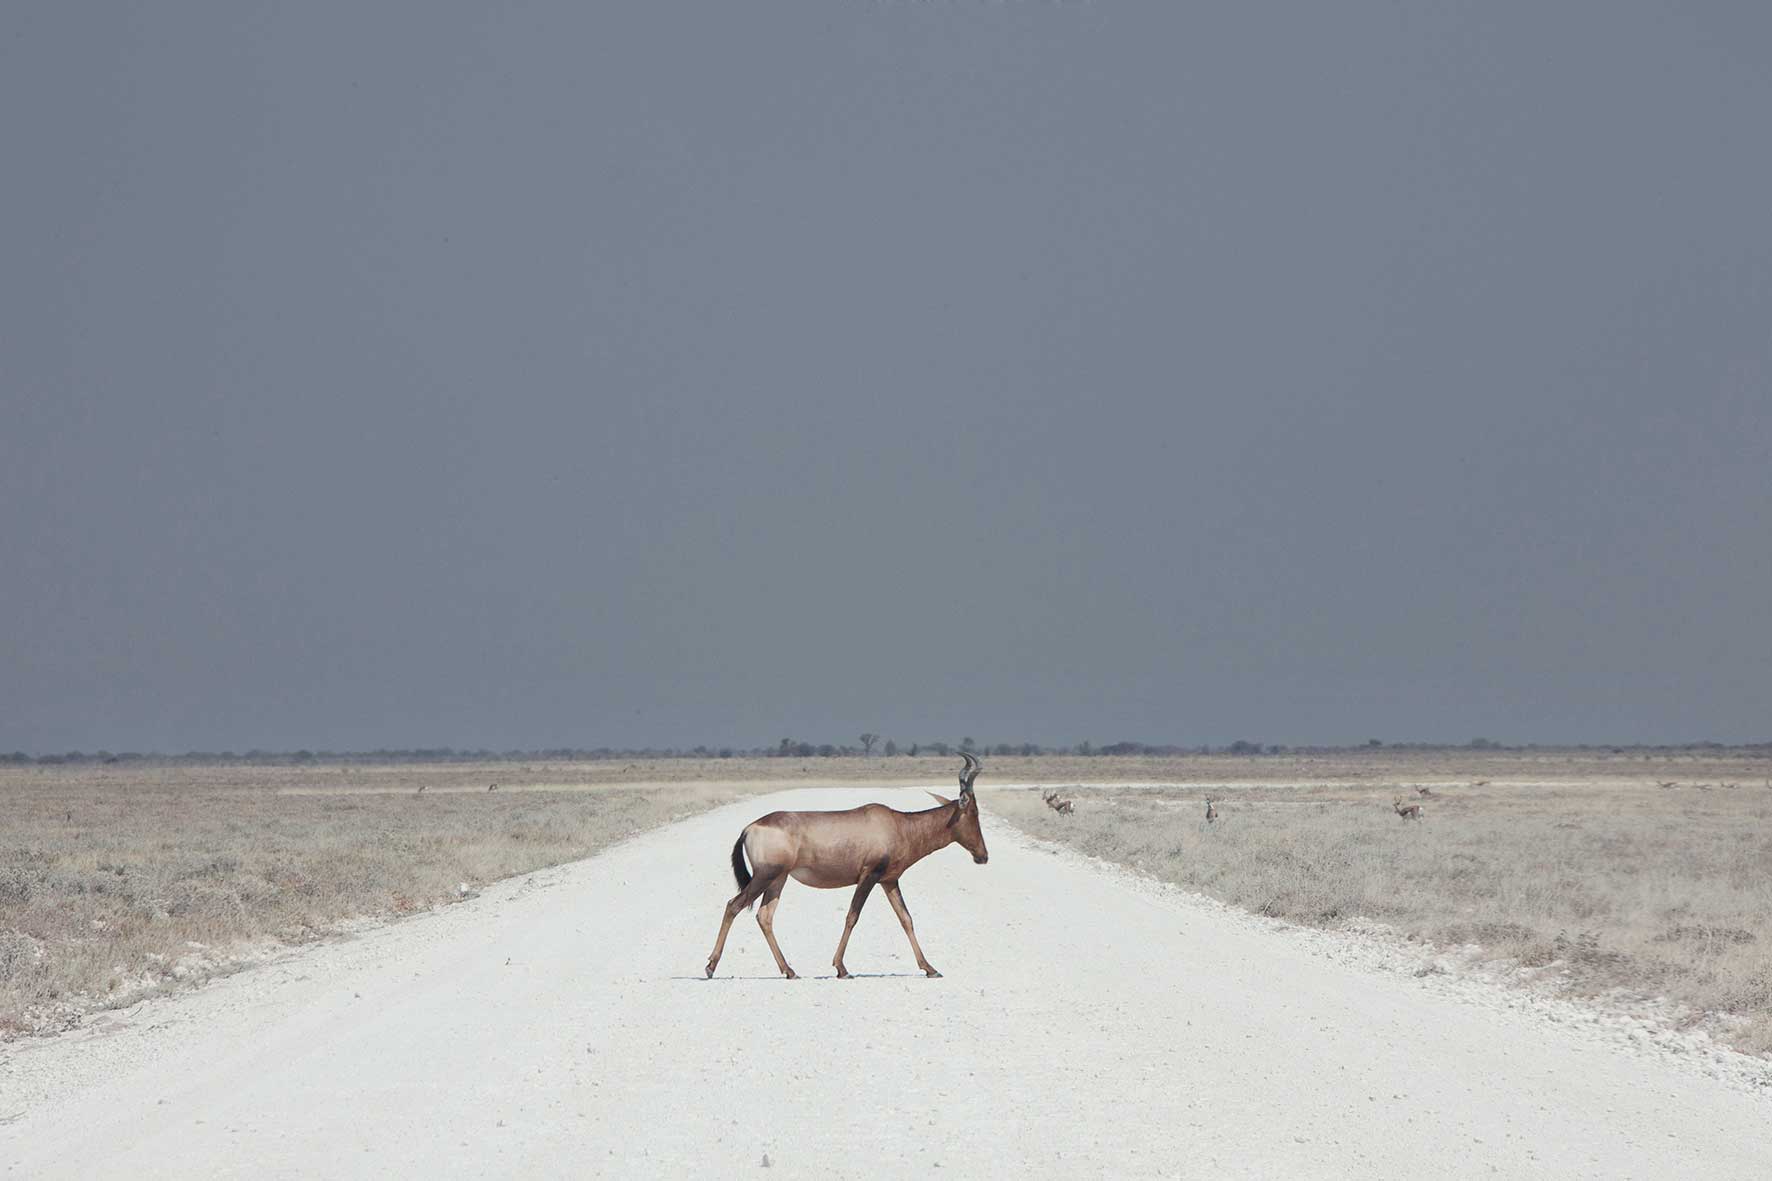 Professional Landscape First Place. Land of Nothingness. An animal walks across the Namibia Desert, one of the least densely populated places on earth.